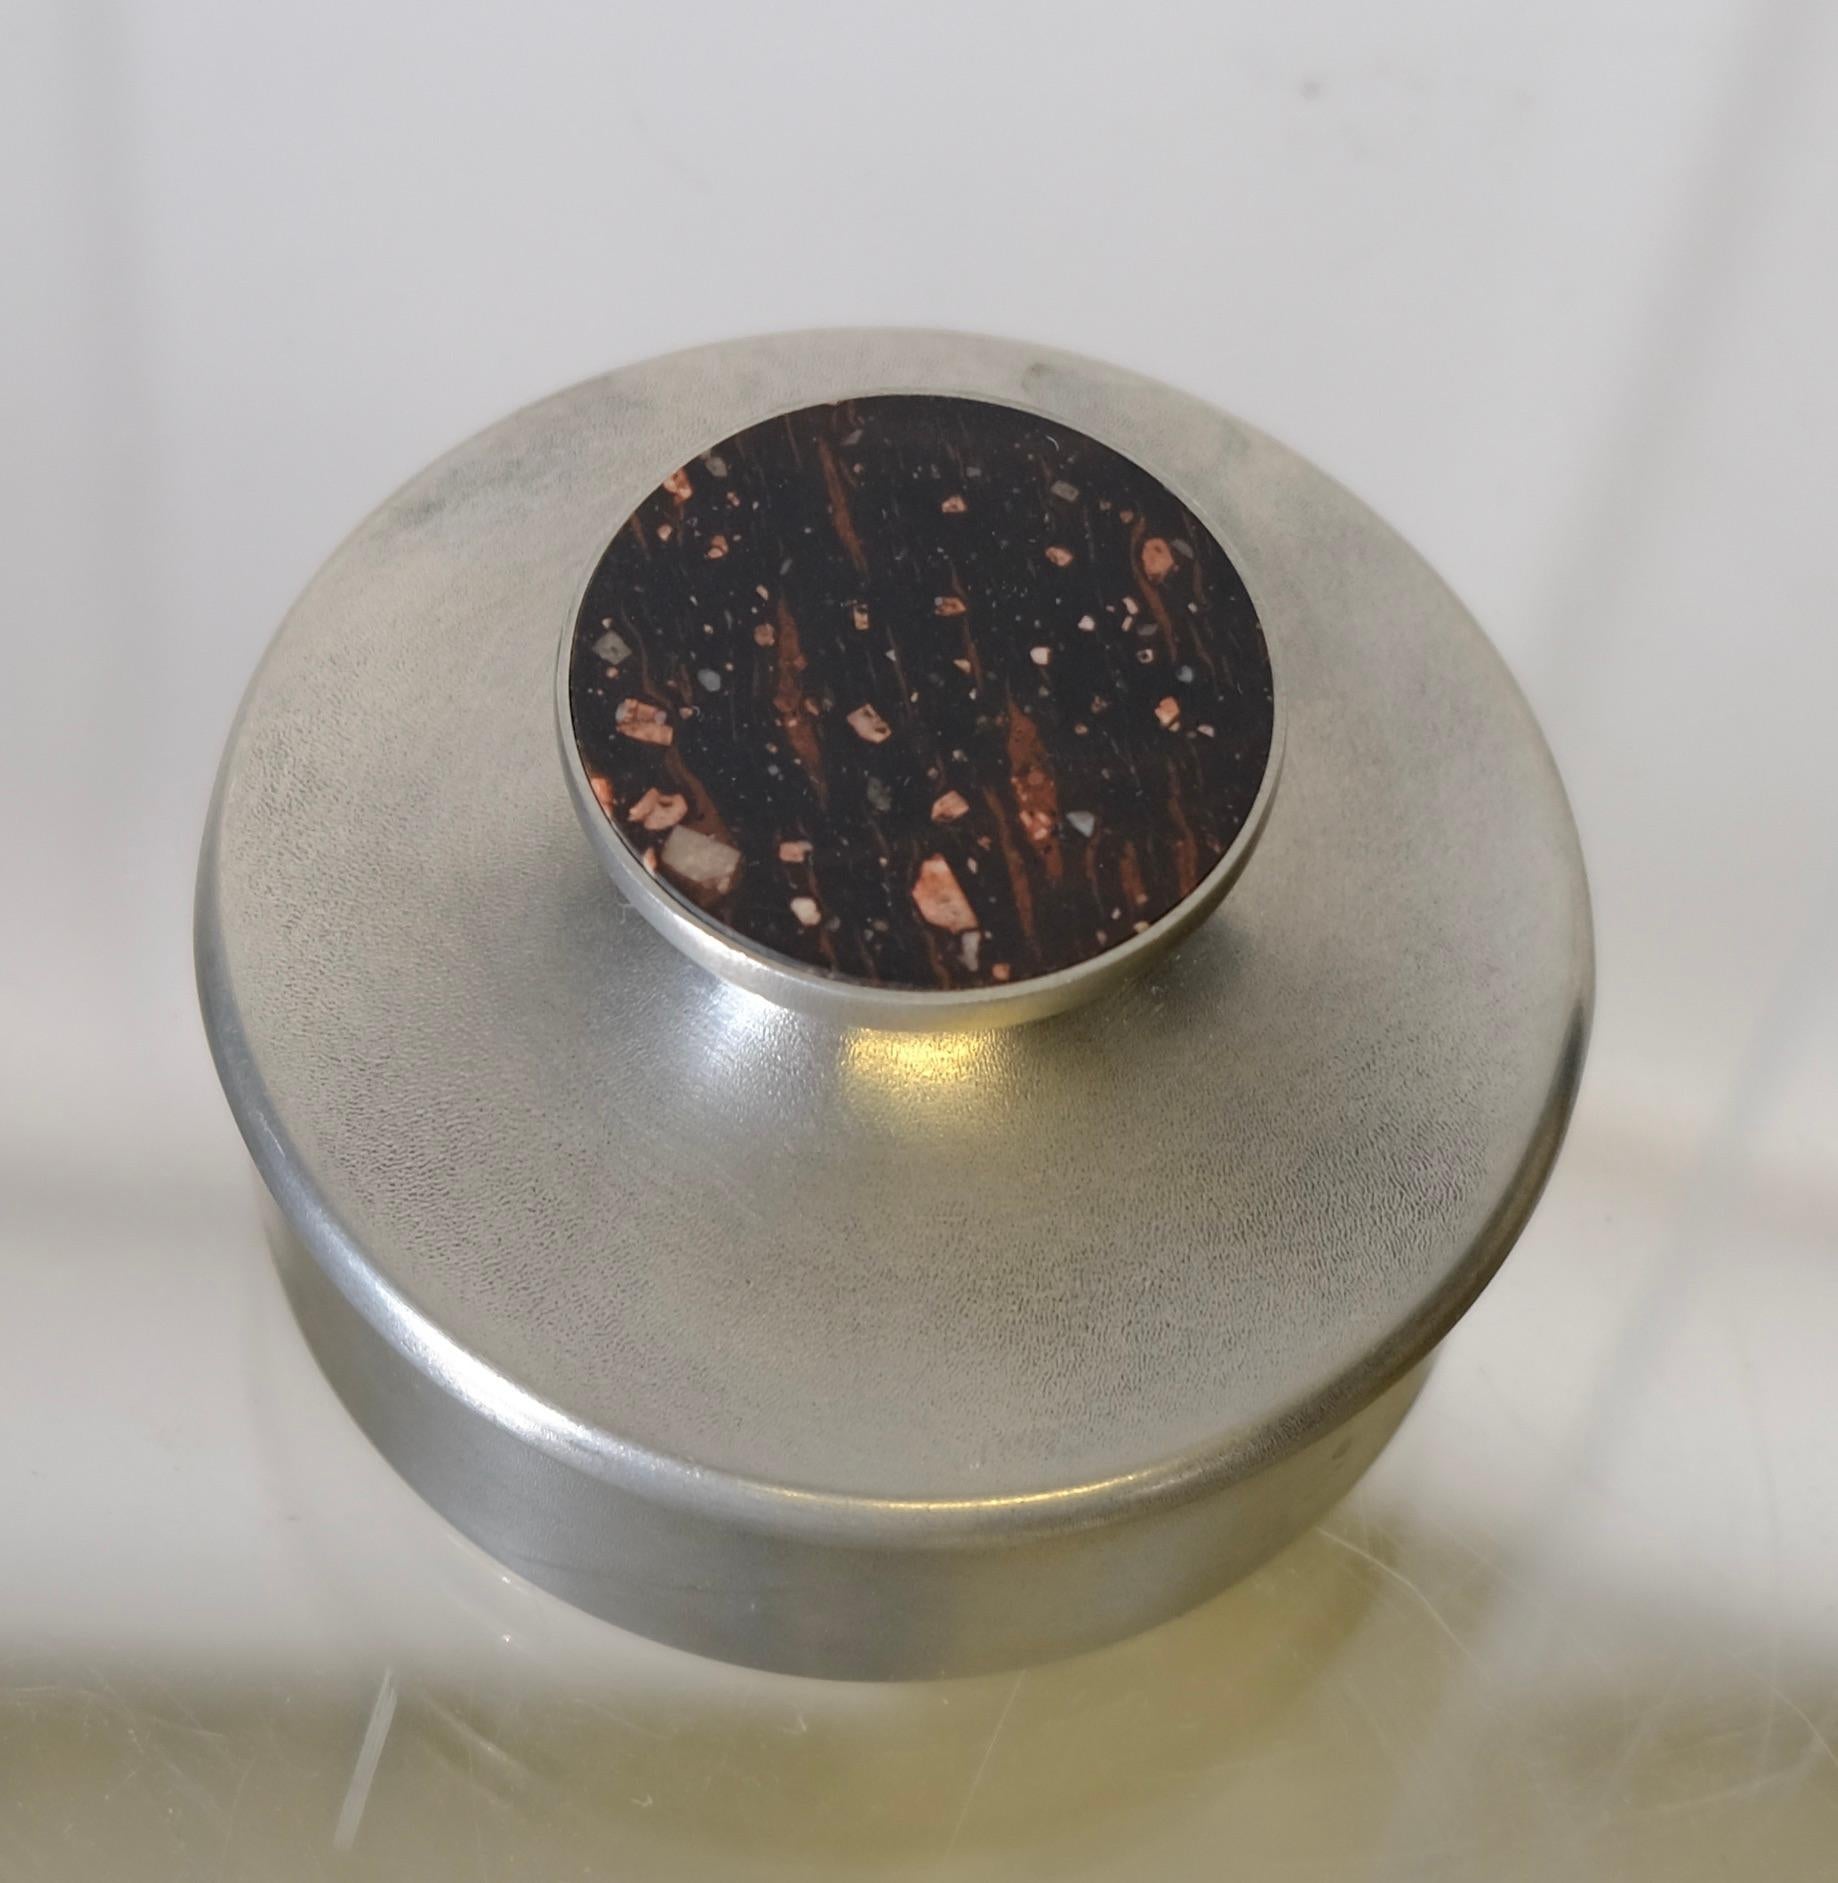 A small pewter box with lid. In the lid a piece of Swedish Porphyry is inlaid. Made 1974 by the company STENLYA.